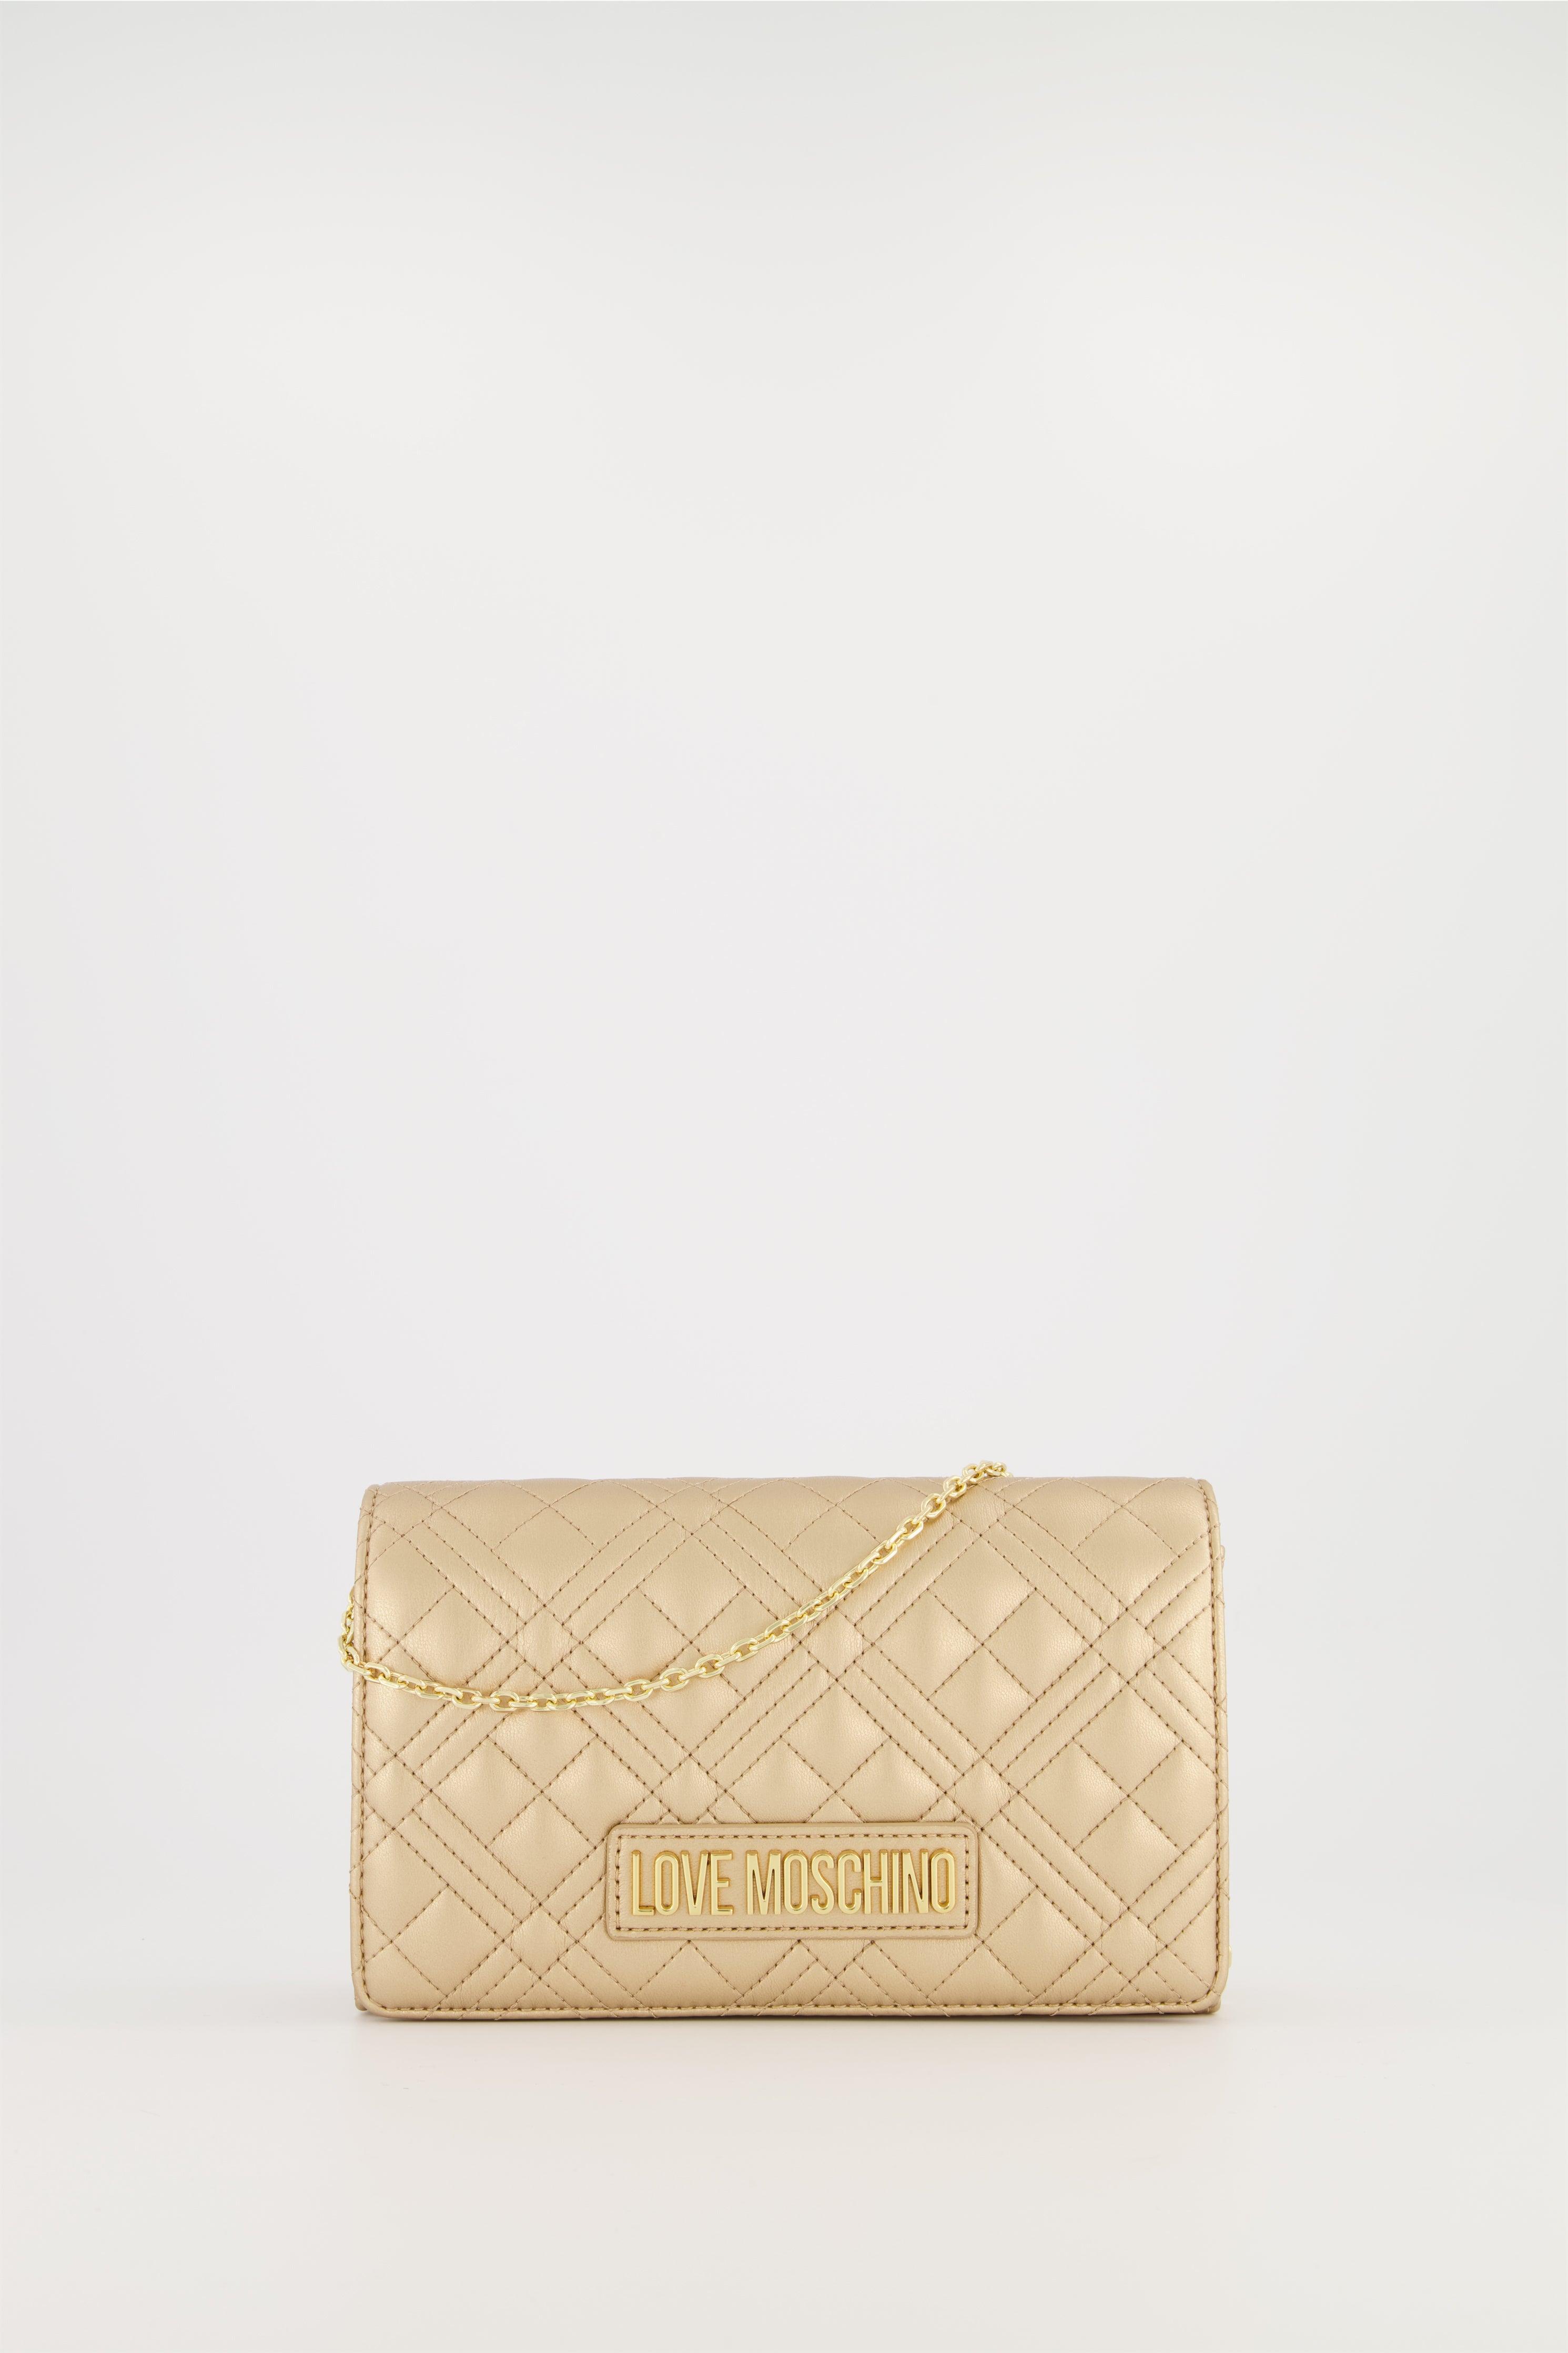 Love Moschino Gold Quilted Box Clutch Bag | Lyst